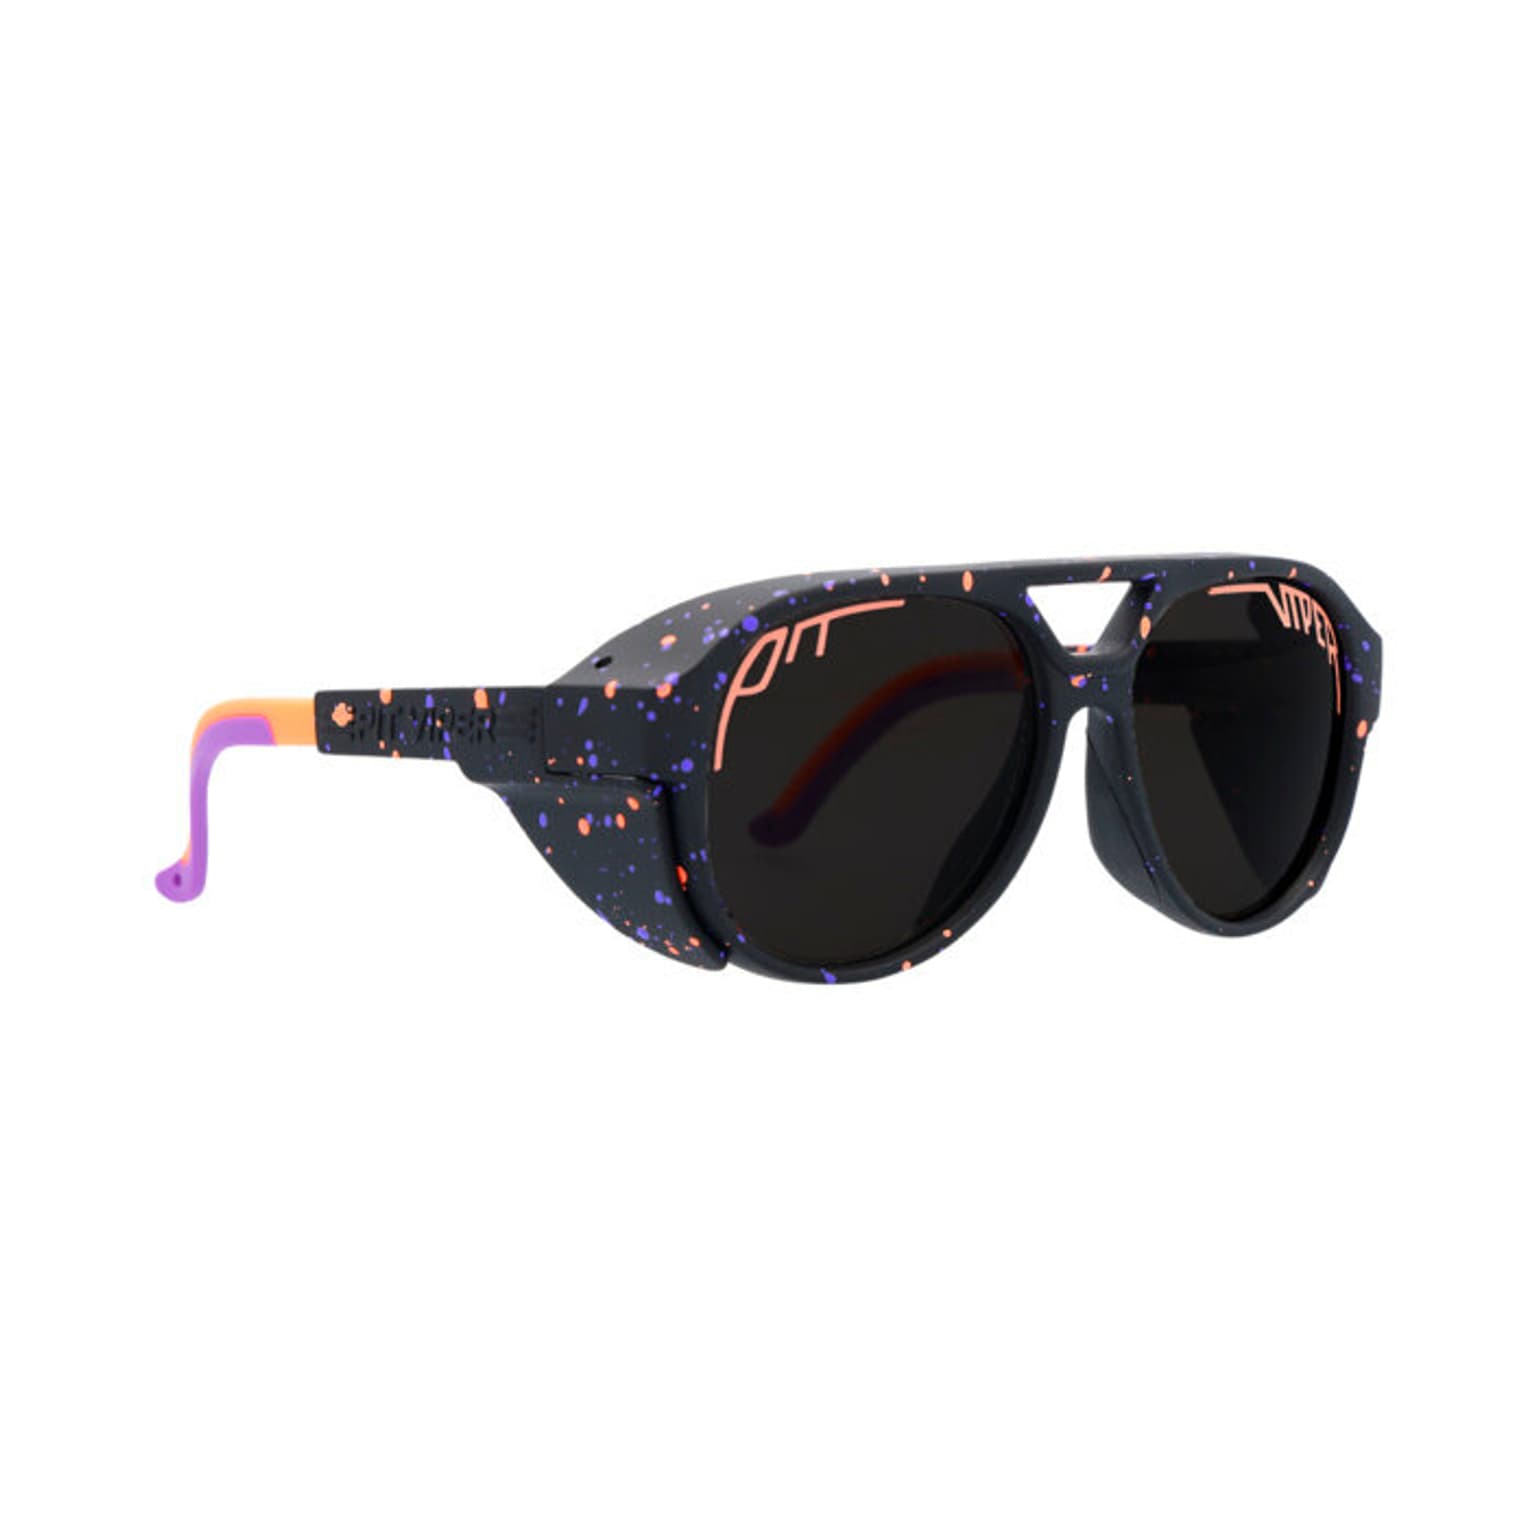 Pit Viper Pit Viper The Exciters The Naples Polarized Sportbrille 1